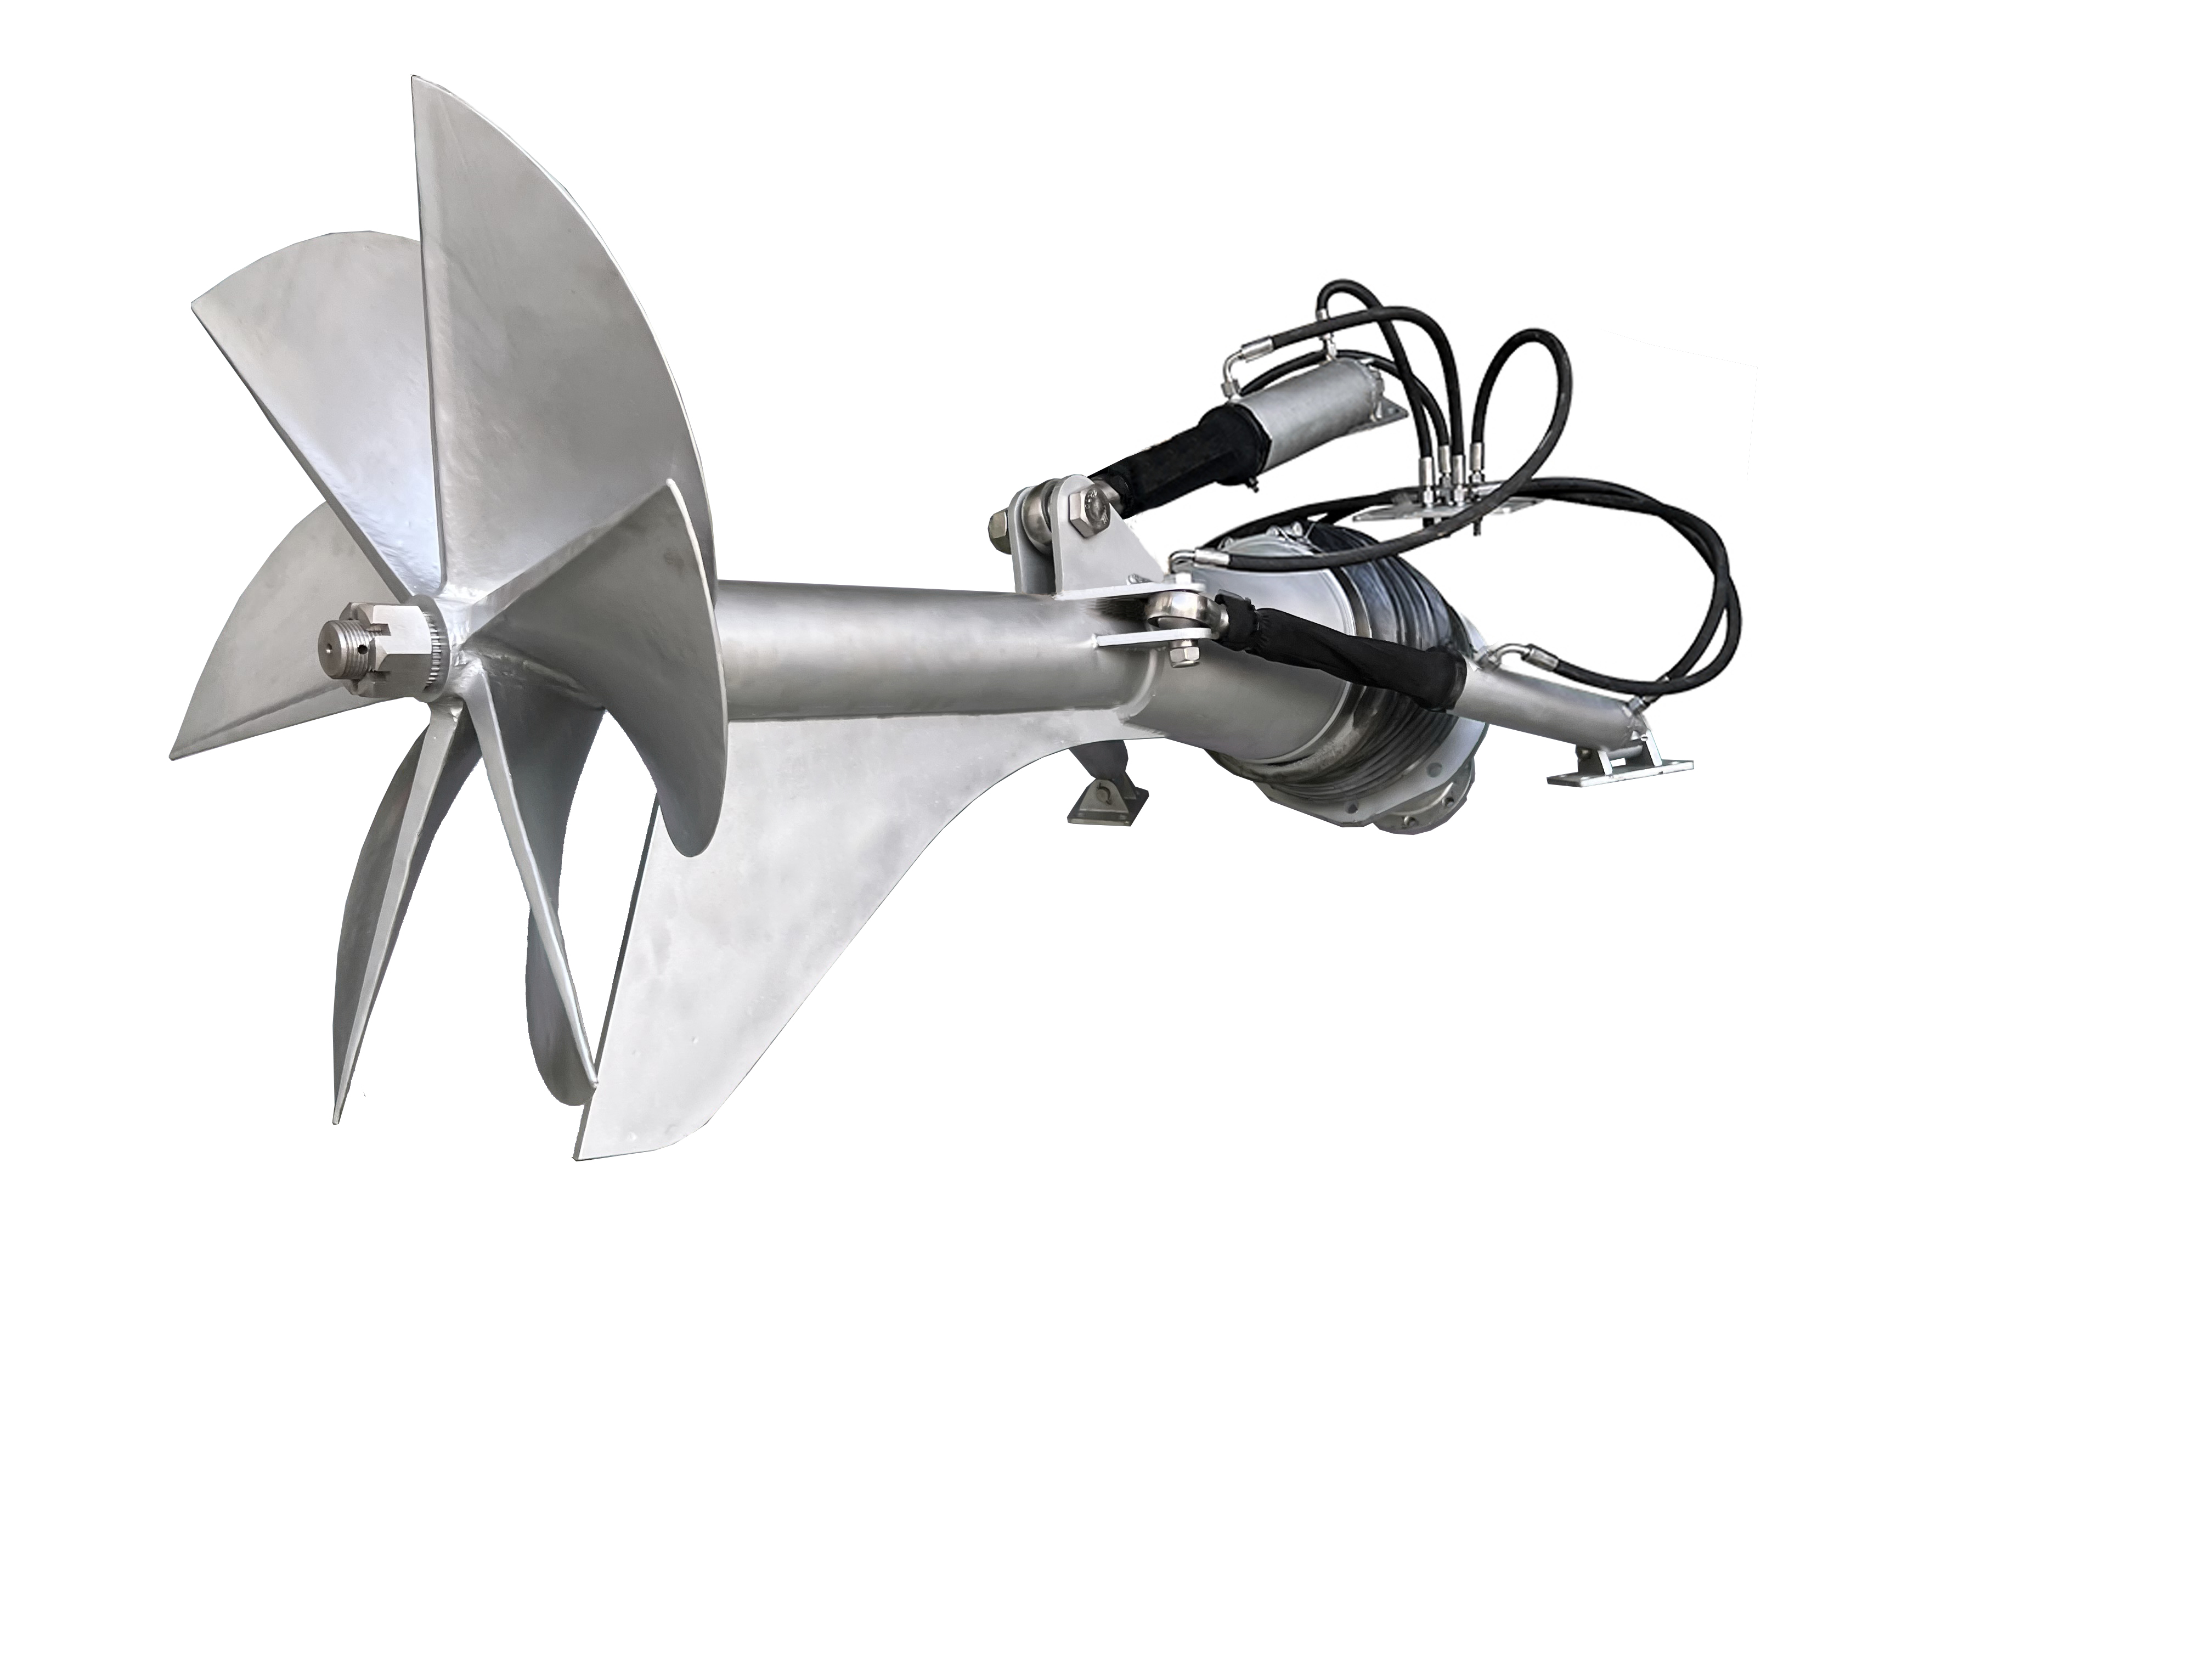 BH660 400Horsepower High Performance Surface Piercing Propeller Surface Drive in High Cost-efficiecy